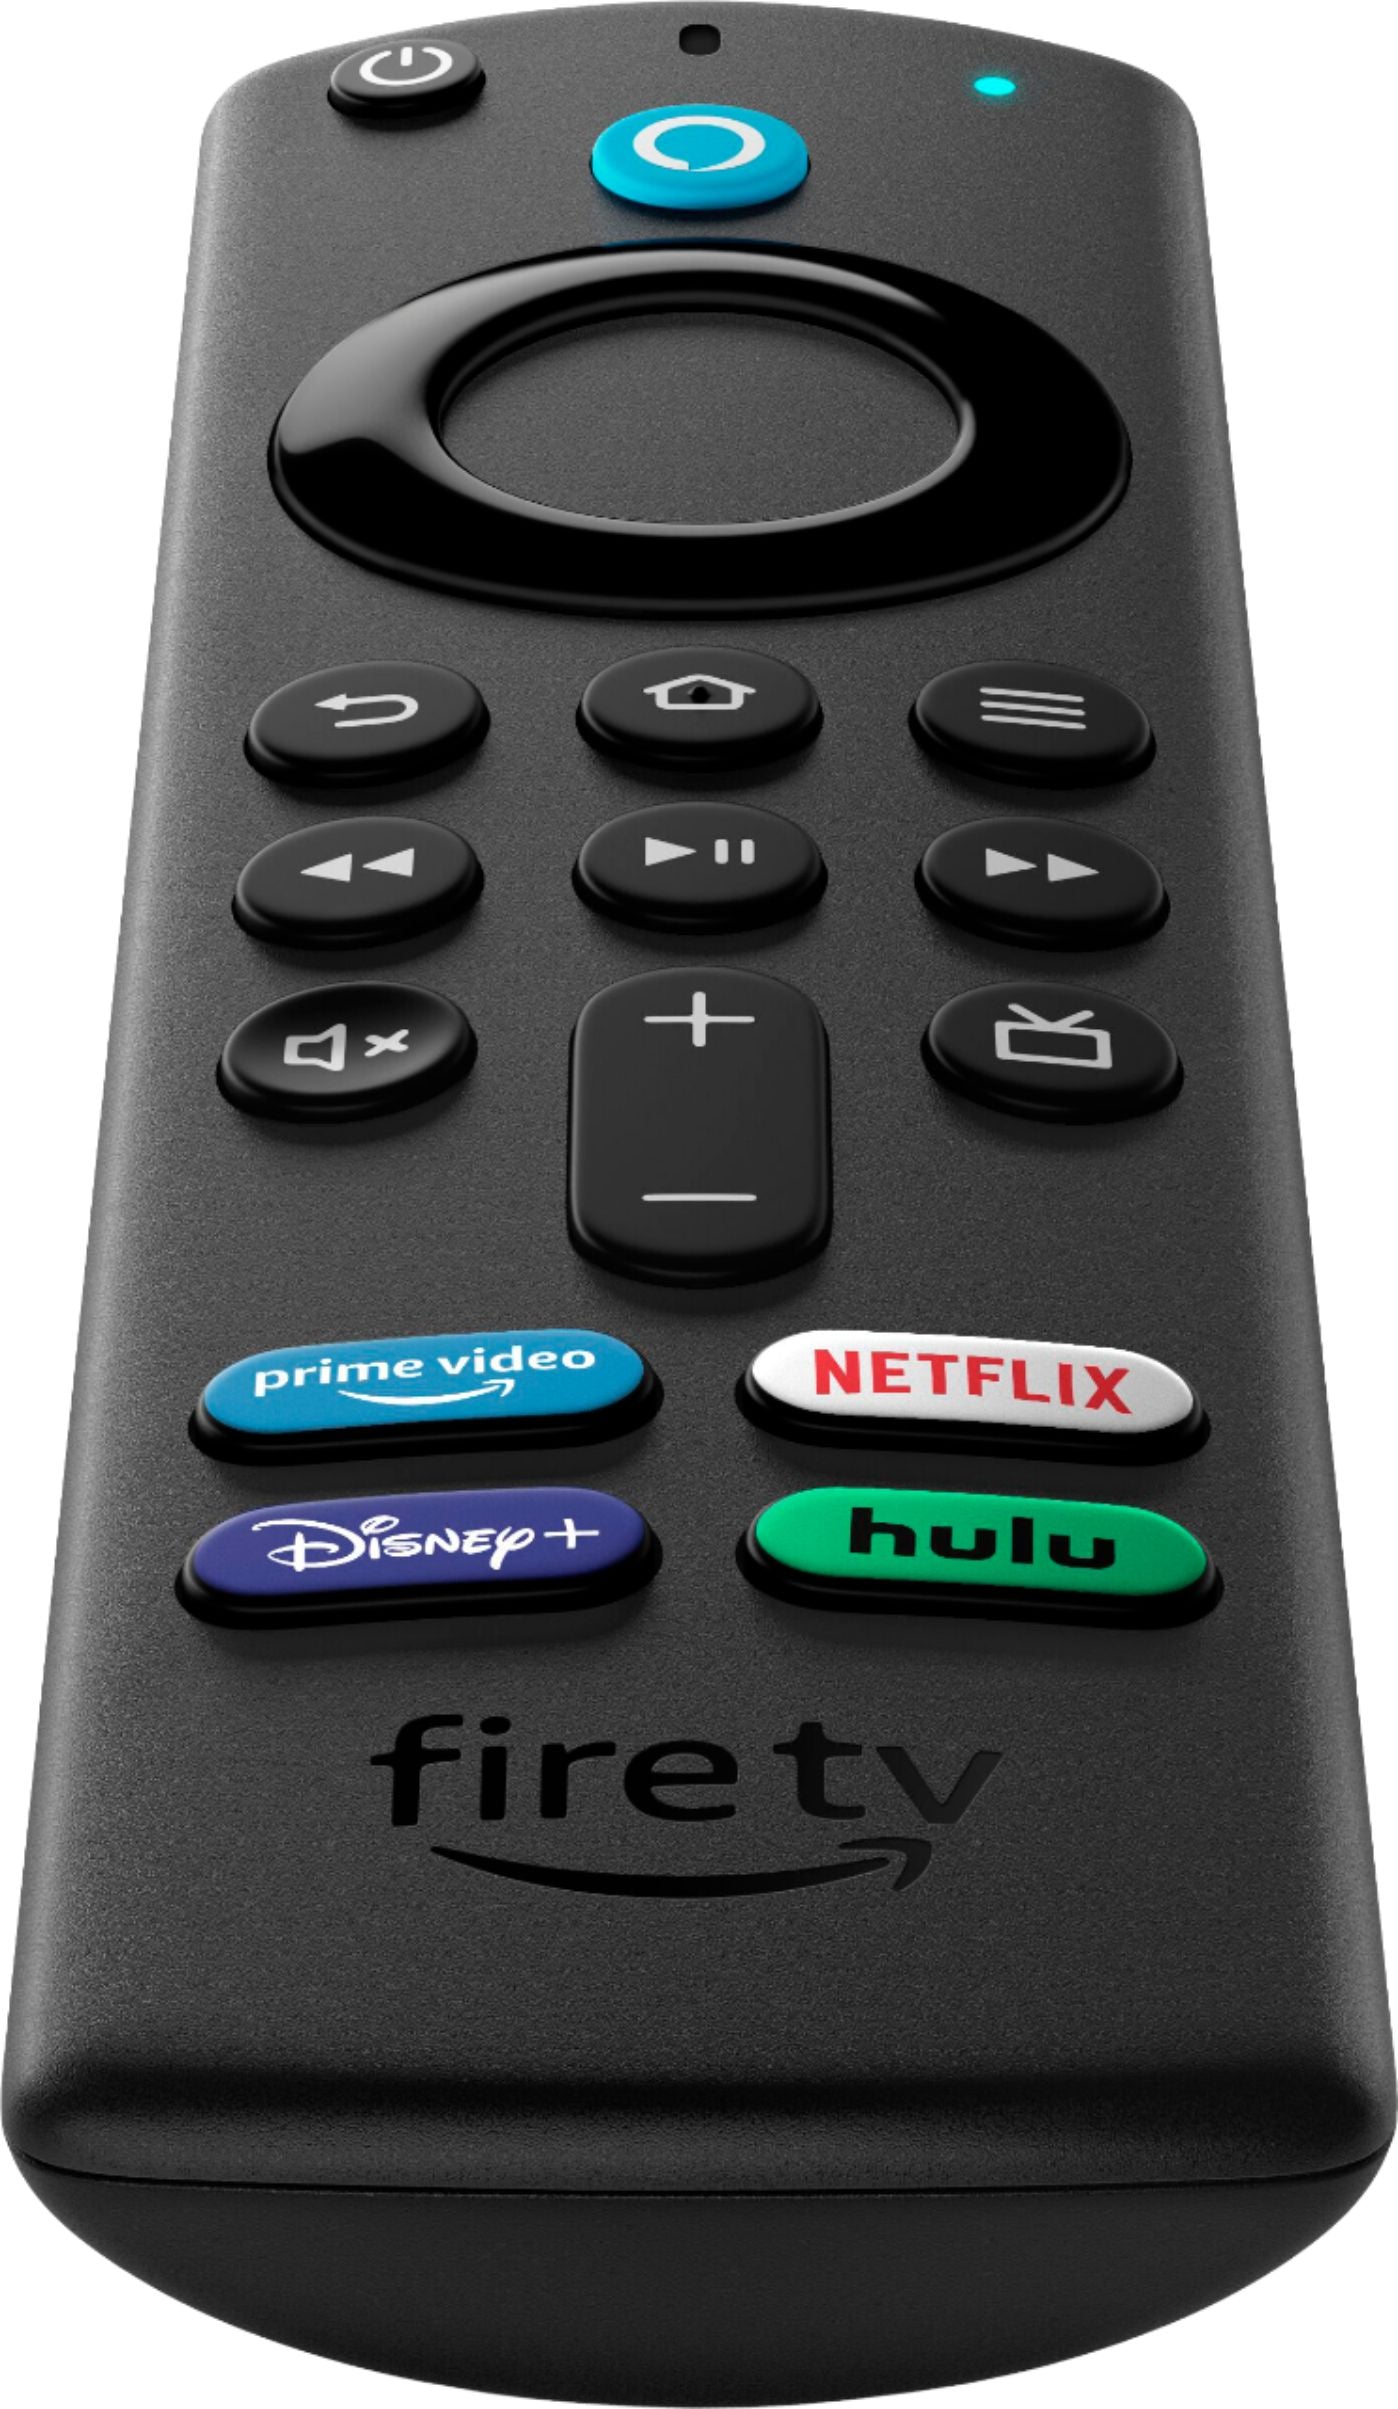 Amazon - B08D6WJYD9 Alexa Voice Remote (3rd Gen) with TV controls | Requires compatible Fire TV device | 2021 release - Black